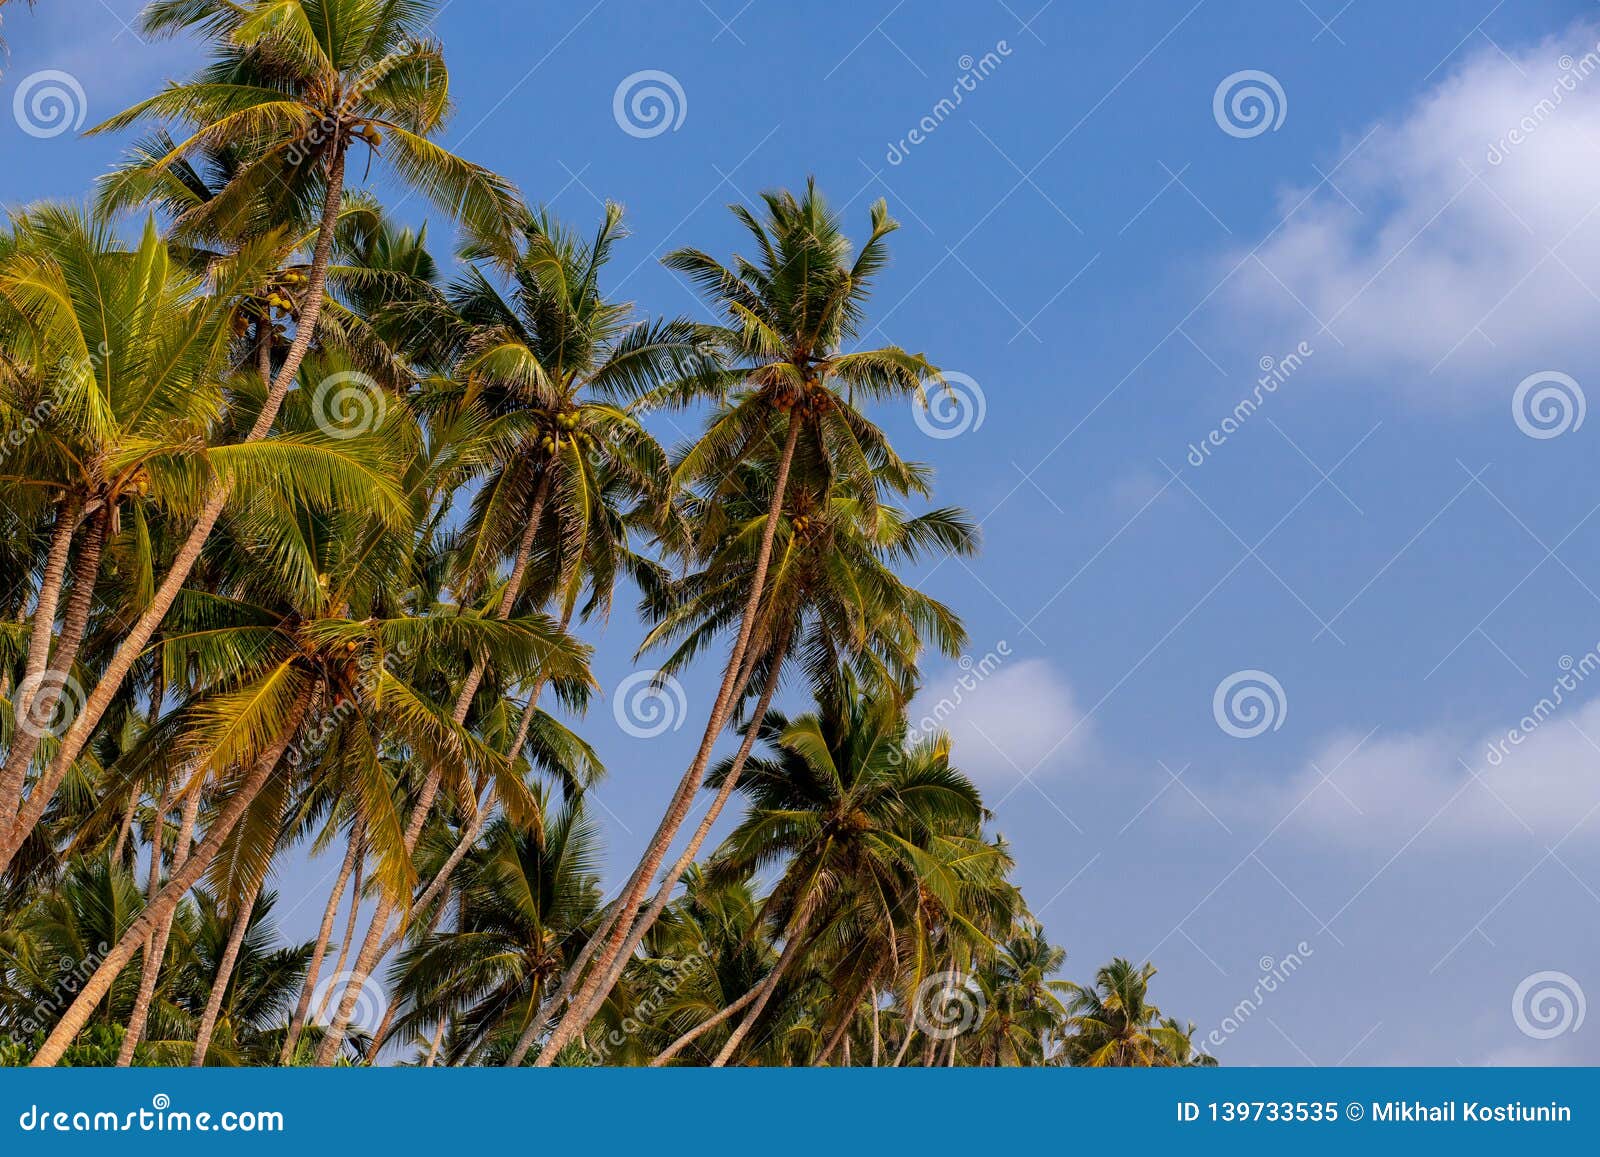 Palms and Beautiful Sky Background Stock Image - Image of scenery ...